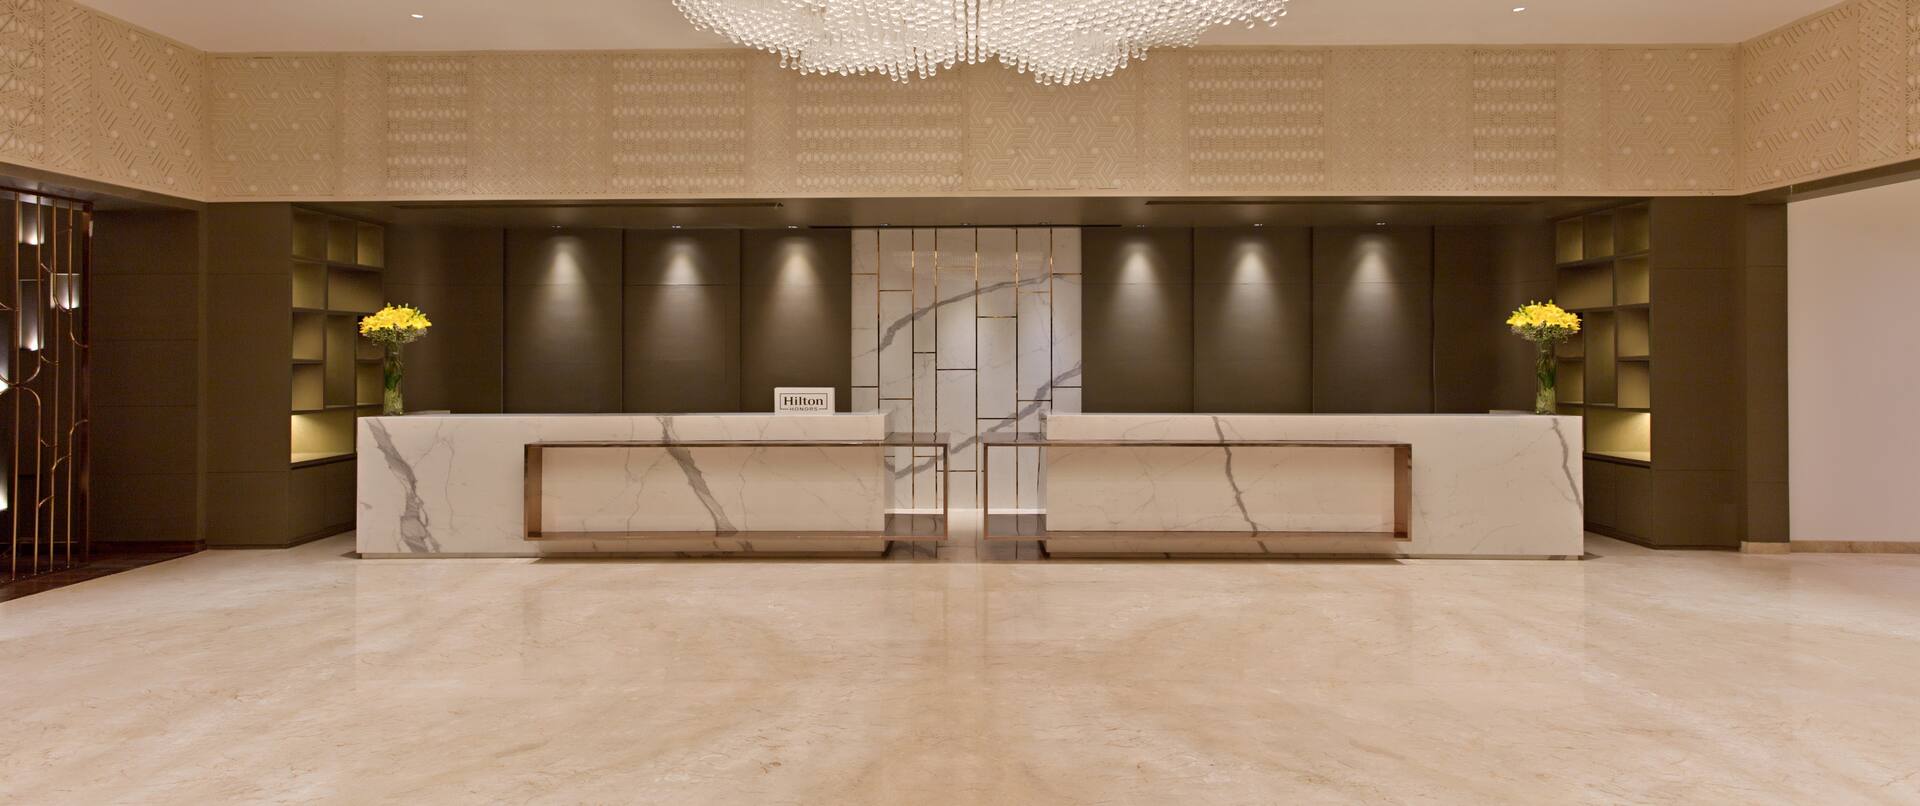 Lobby area with chandelier